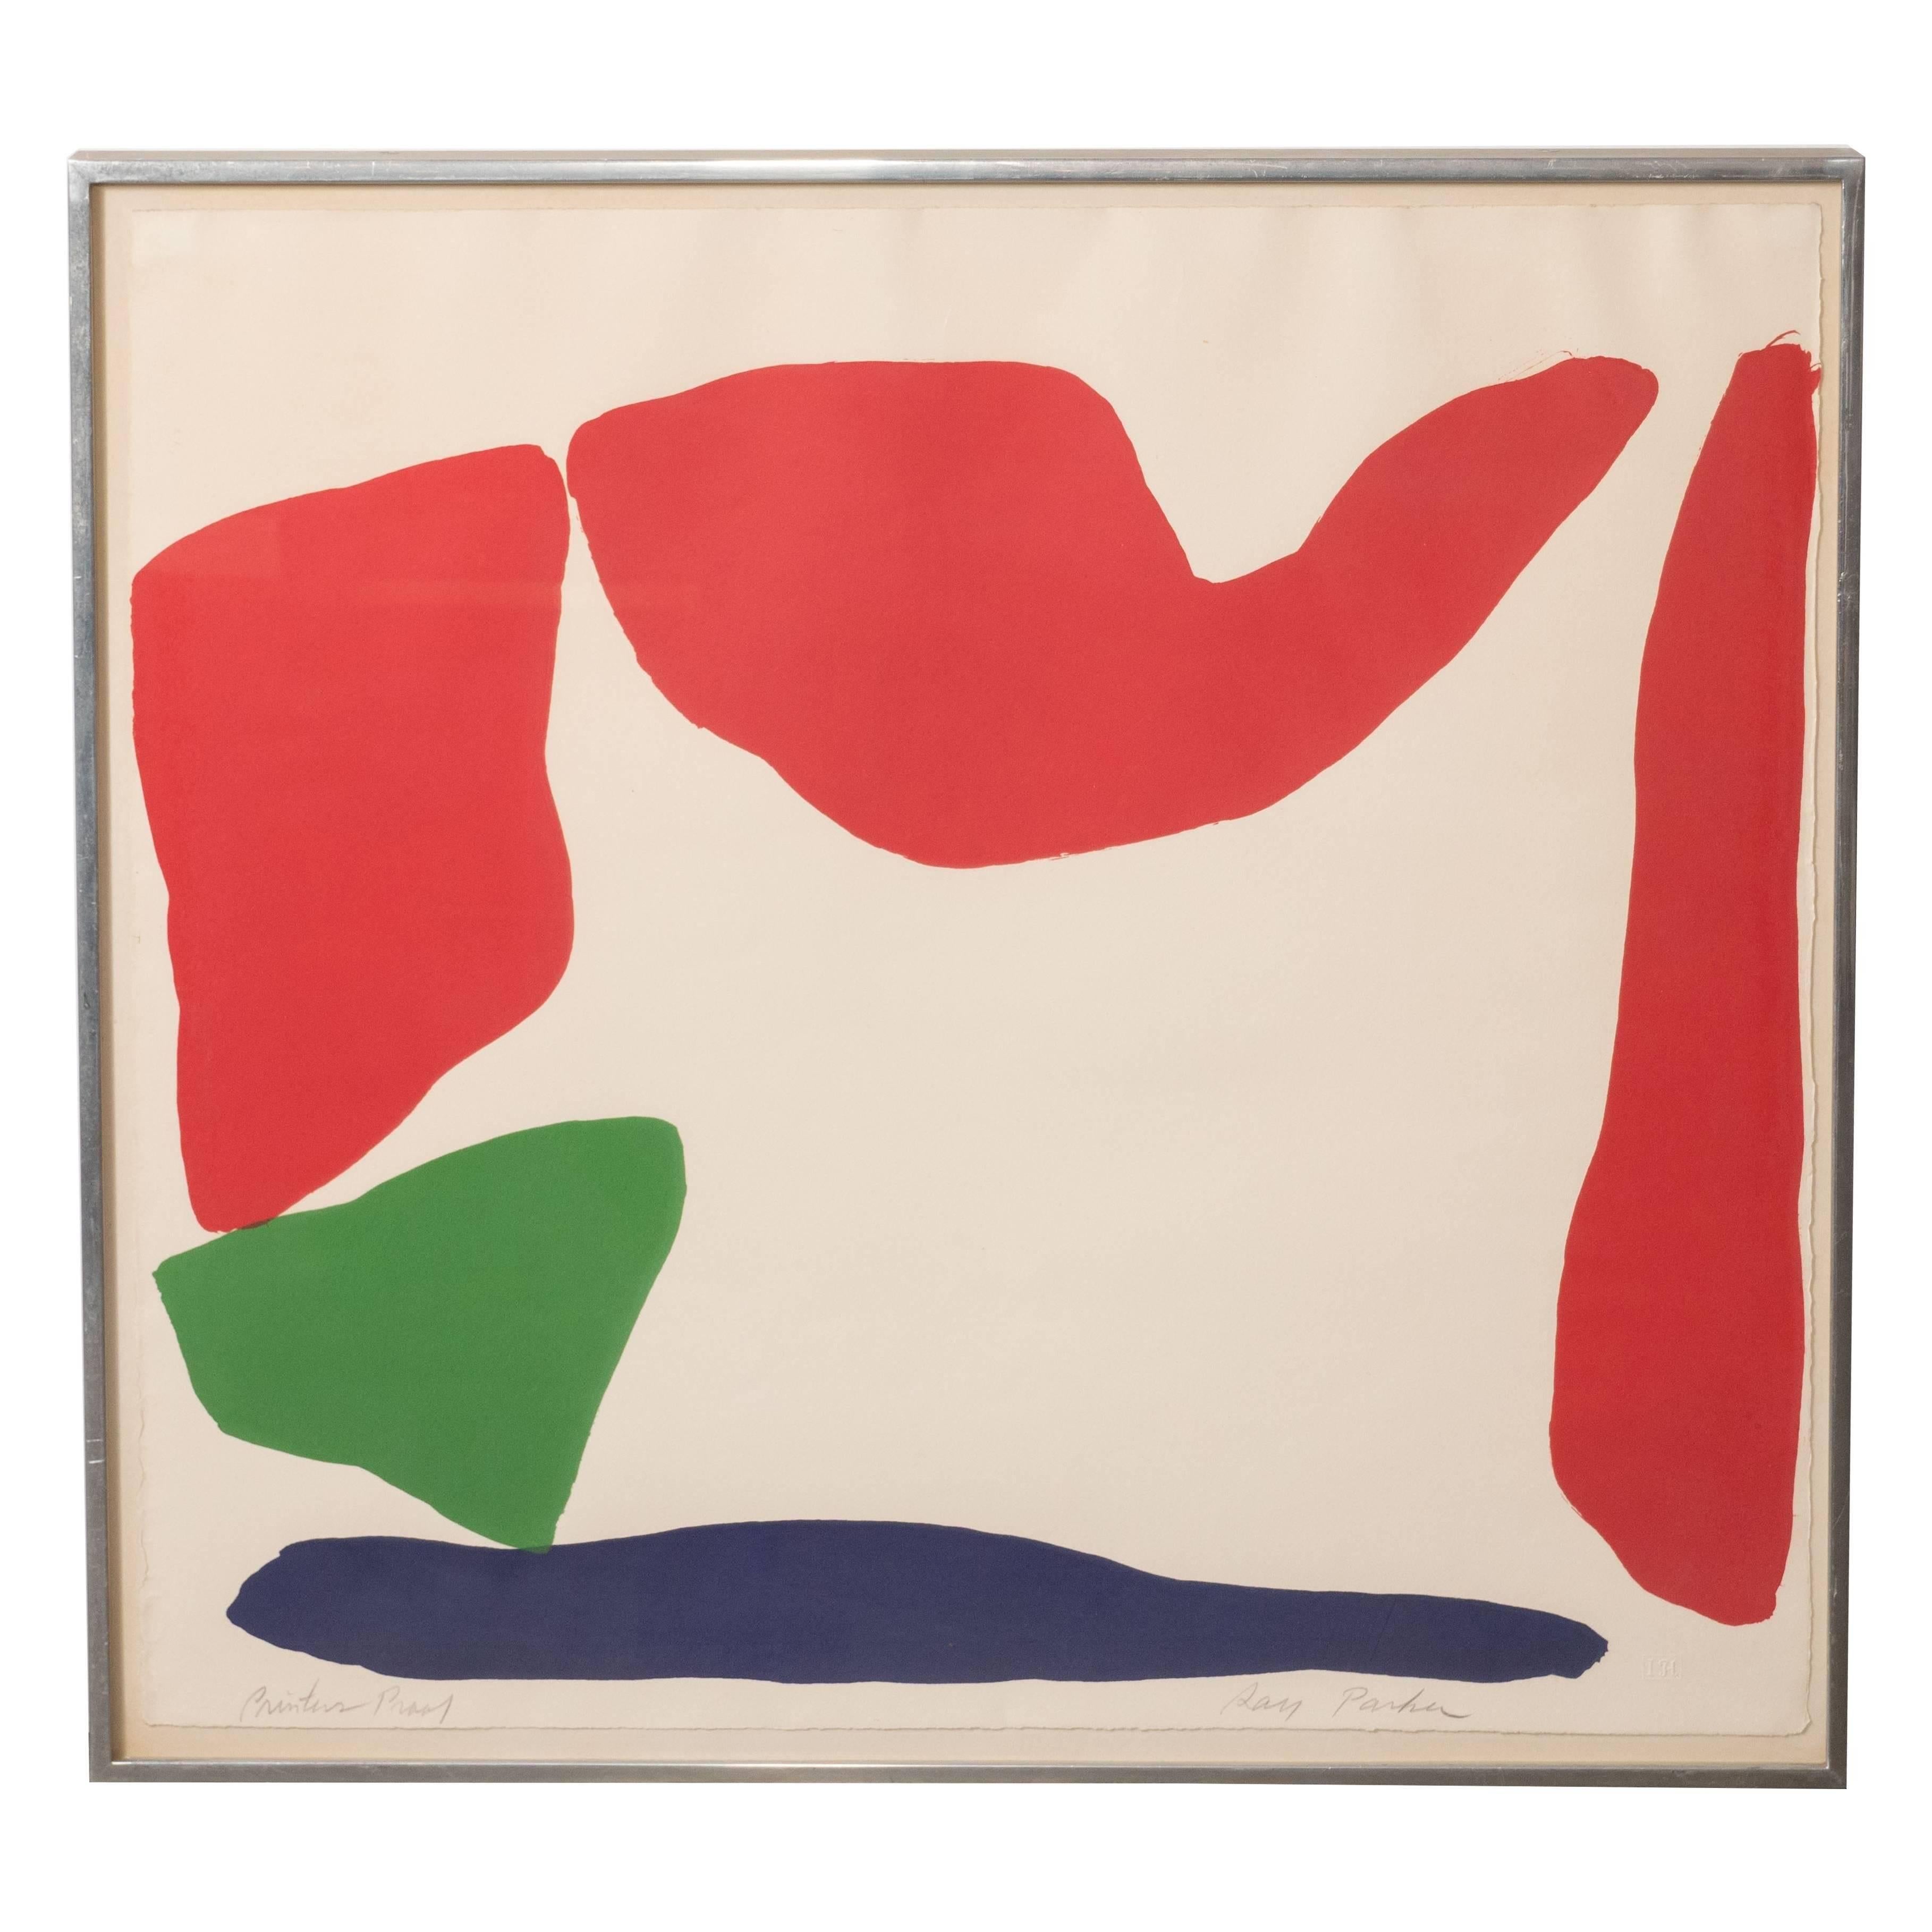 Raymond Parker Abstract Print - Modernist Abstract Composition Lithograph by Ray Parker, circa 1960